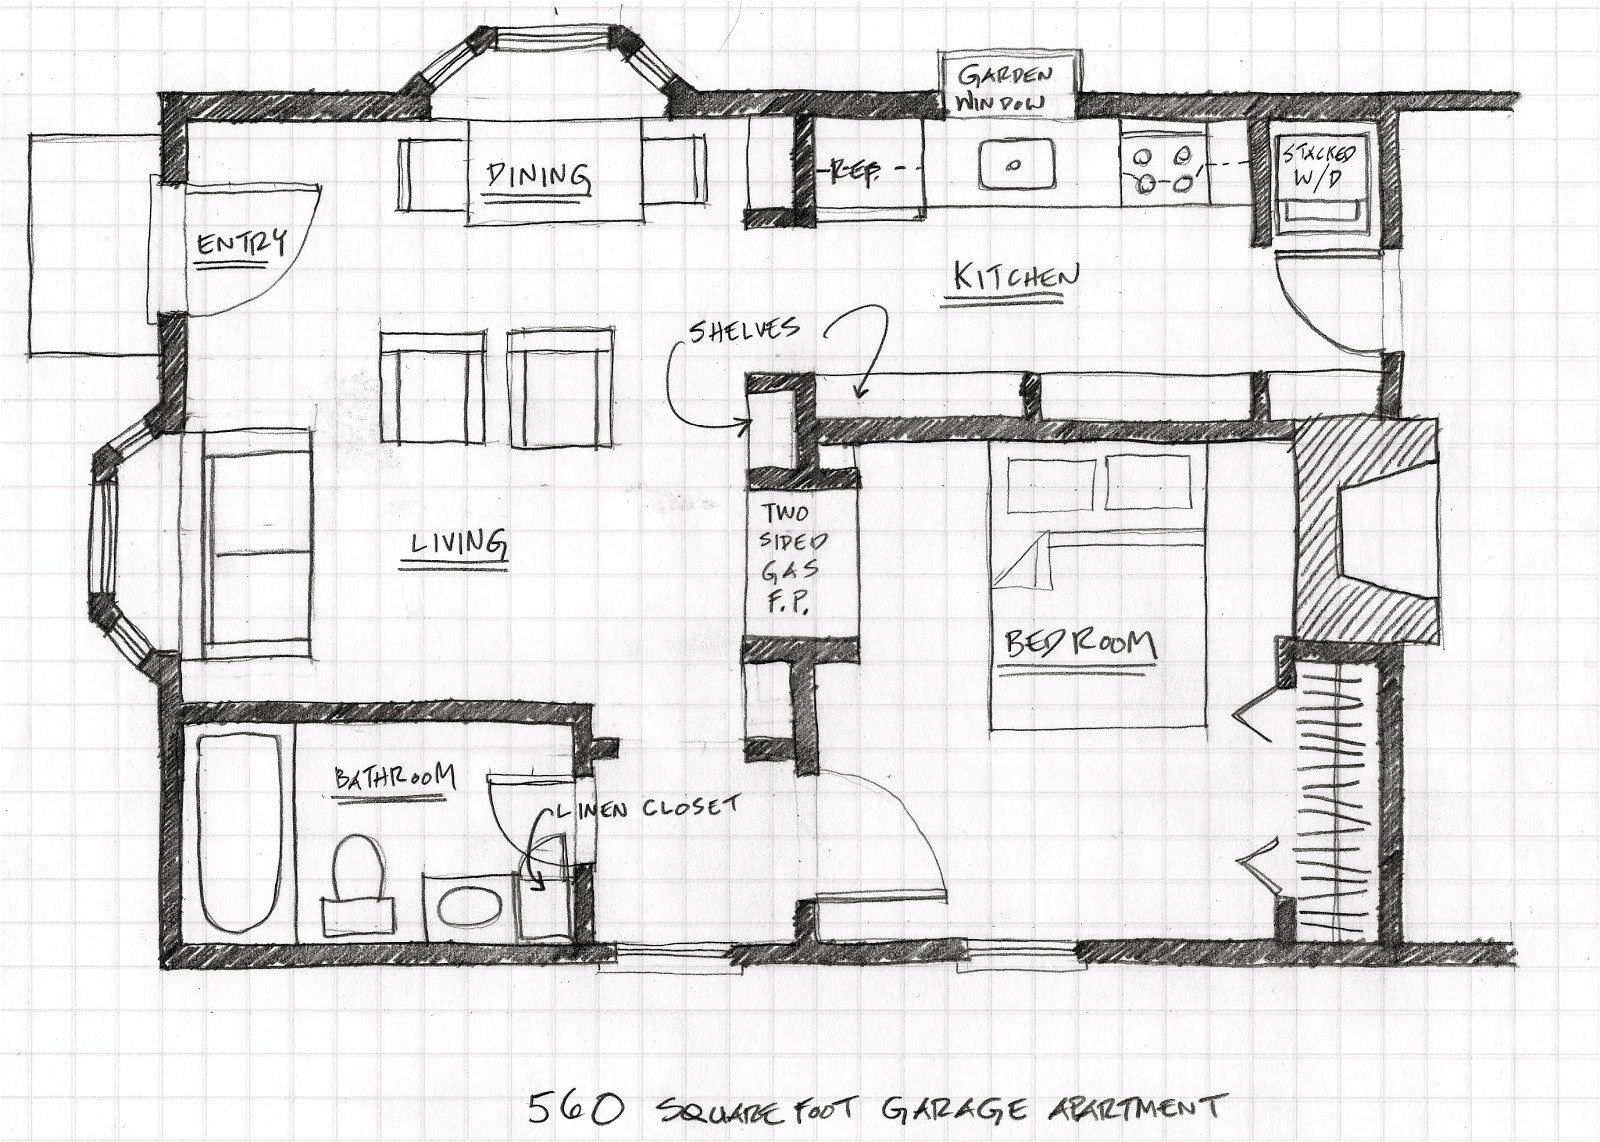 floor plans for garage to apartment